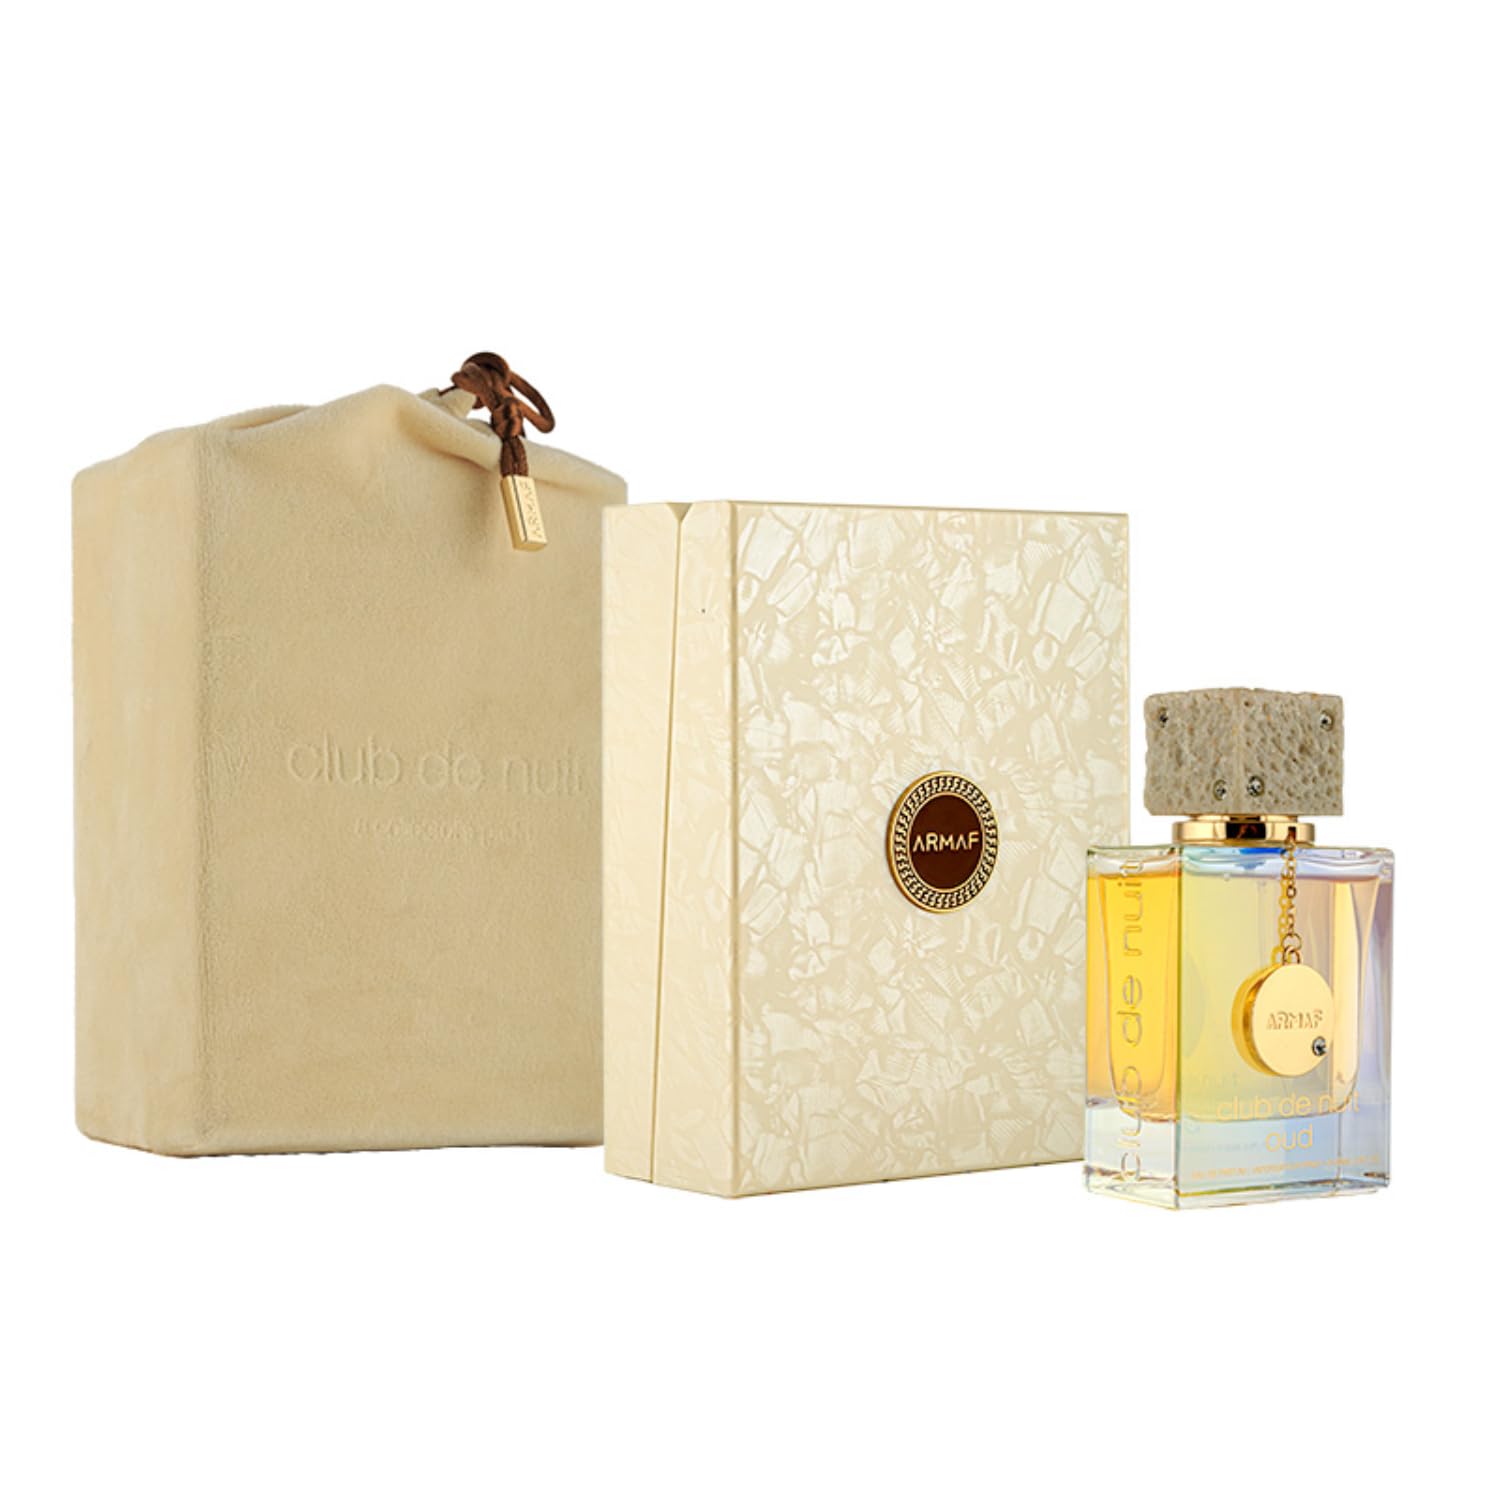 <div>Indulge in a blend of luxurious scents with top notes of Bergamot, Pineapple, Peach, Passion fruit, Pear, and Plum. These give way to a floral heart of Jasmine, Freesia, Violet leaves, and Cashmere wood. The base notes of Sandalwood, Cambodian Oud, Cypriol, Crystal Amber, Musk, and Vanilla provide a sensual and sophisticated finish.</div>
<ul data-mce-fragment="1" class="a-unordered-list a-vertical a-spacing-mini"></ul>